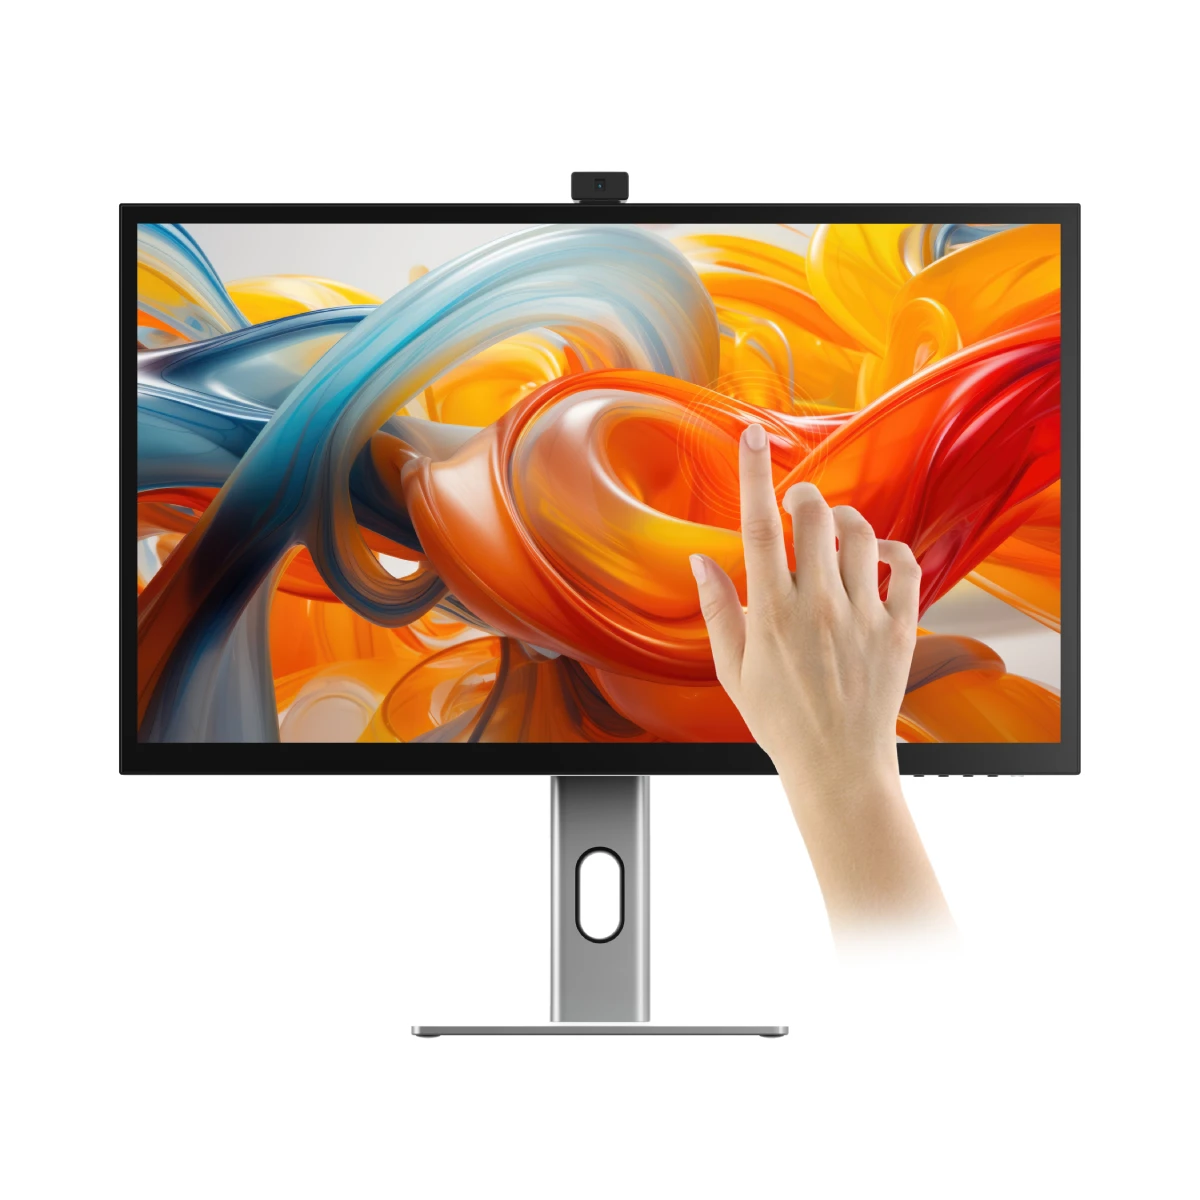 clarity-pro-touch-27-uhd-4k-monitor-with-65w-pd-webcam-and-touchscreen-pack-of-2_2